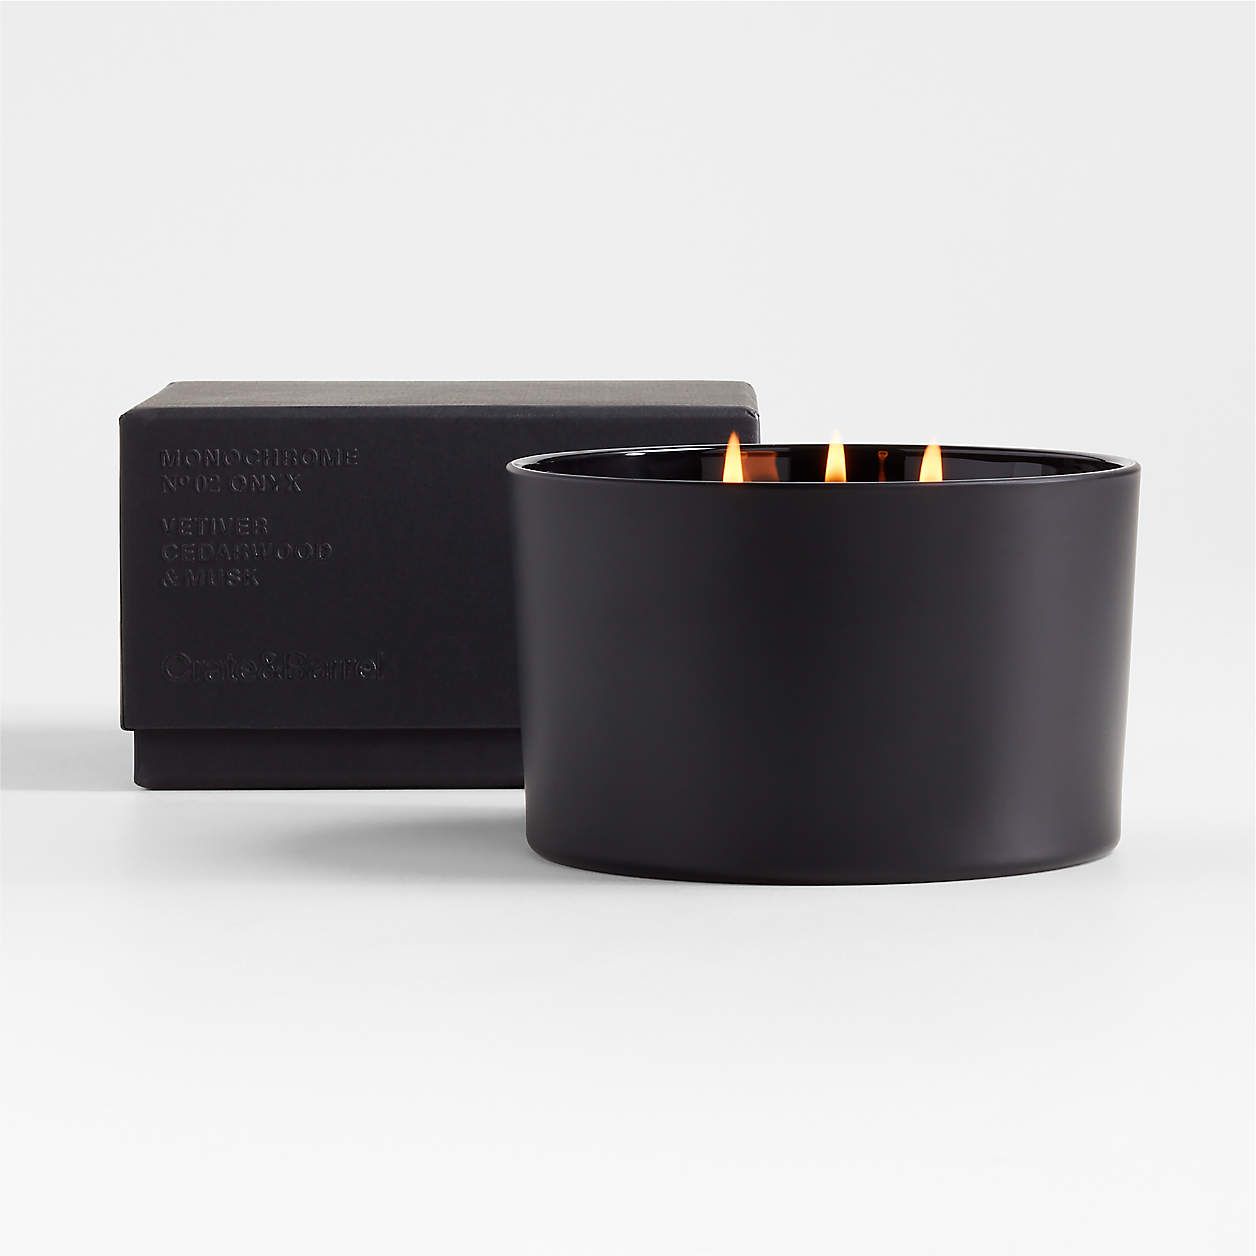 Monochrome No. 6 Blue Dusk 3-Wick Scented Candle - Clove, Frankincense and Rose + Reviews | Crate... | Crate & Barrel